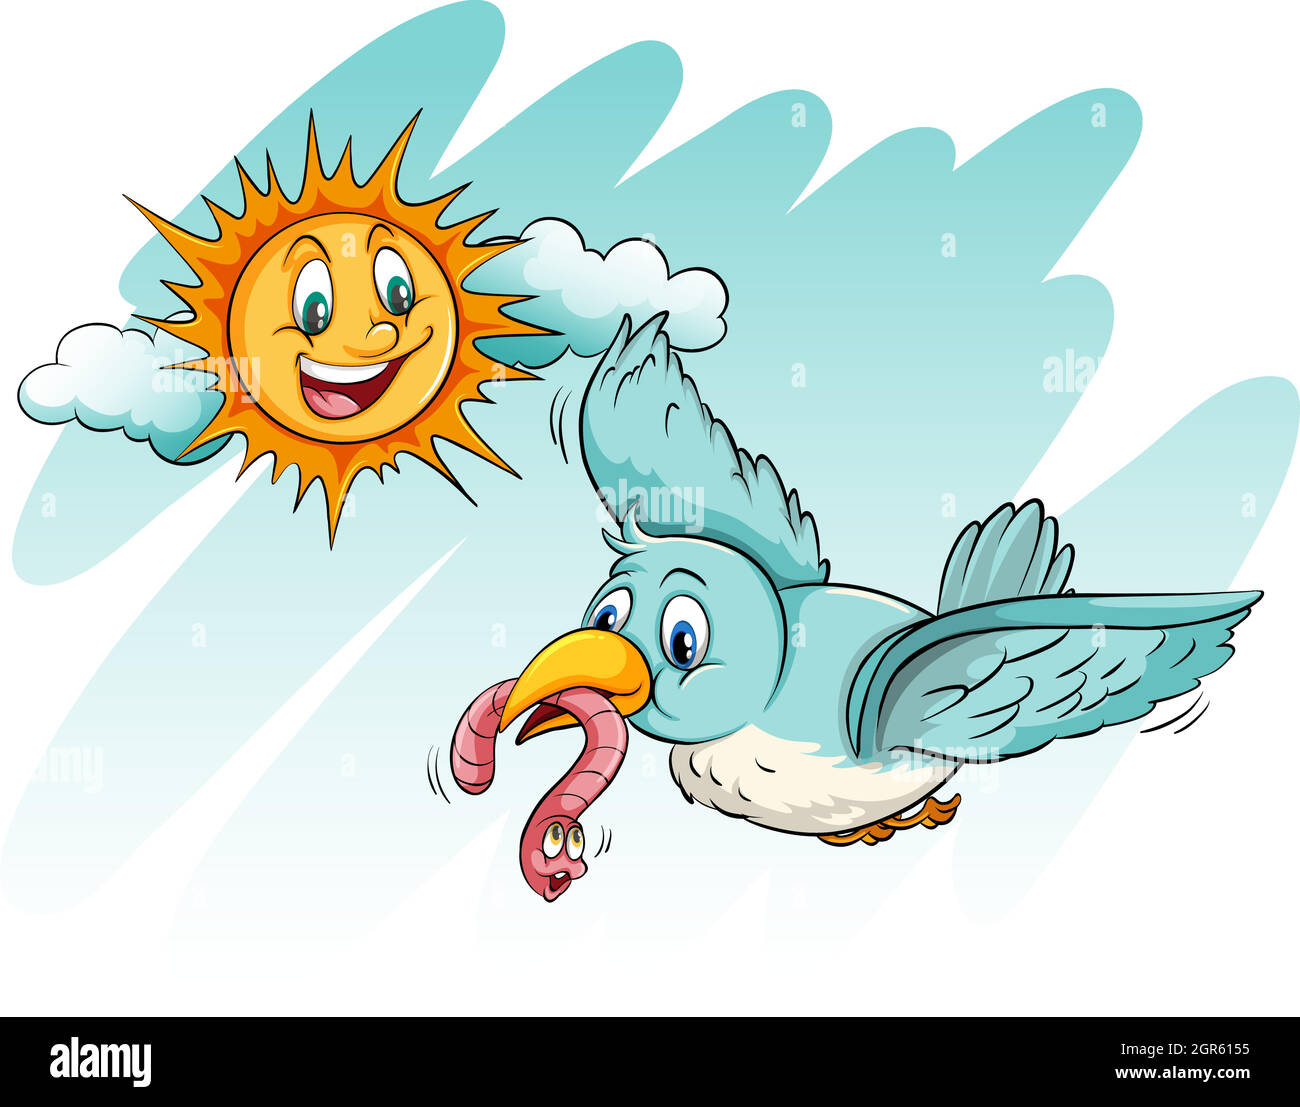 Early bird catching a worm Stock Vector